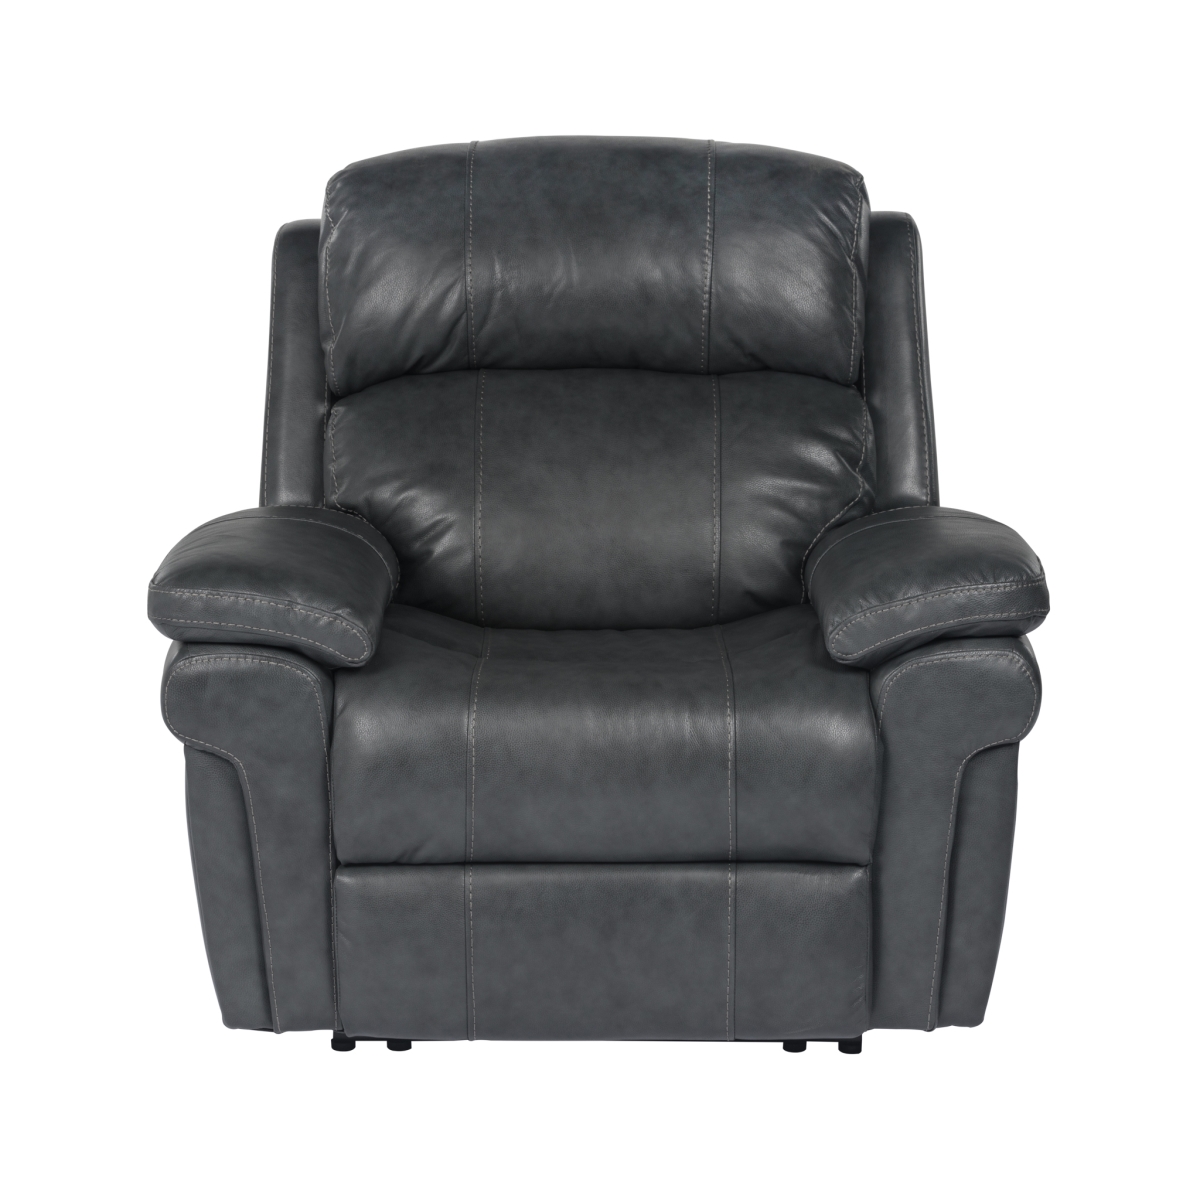 Su-9102-94-1394-85 Luxe Leather Power Reclining Chair